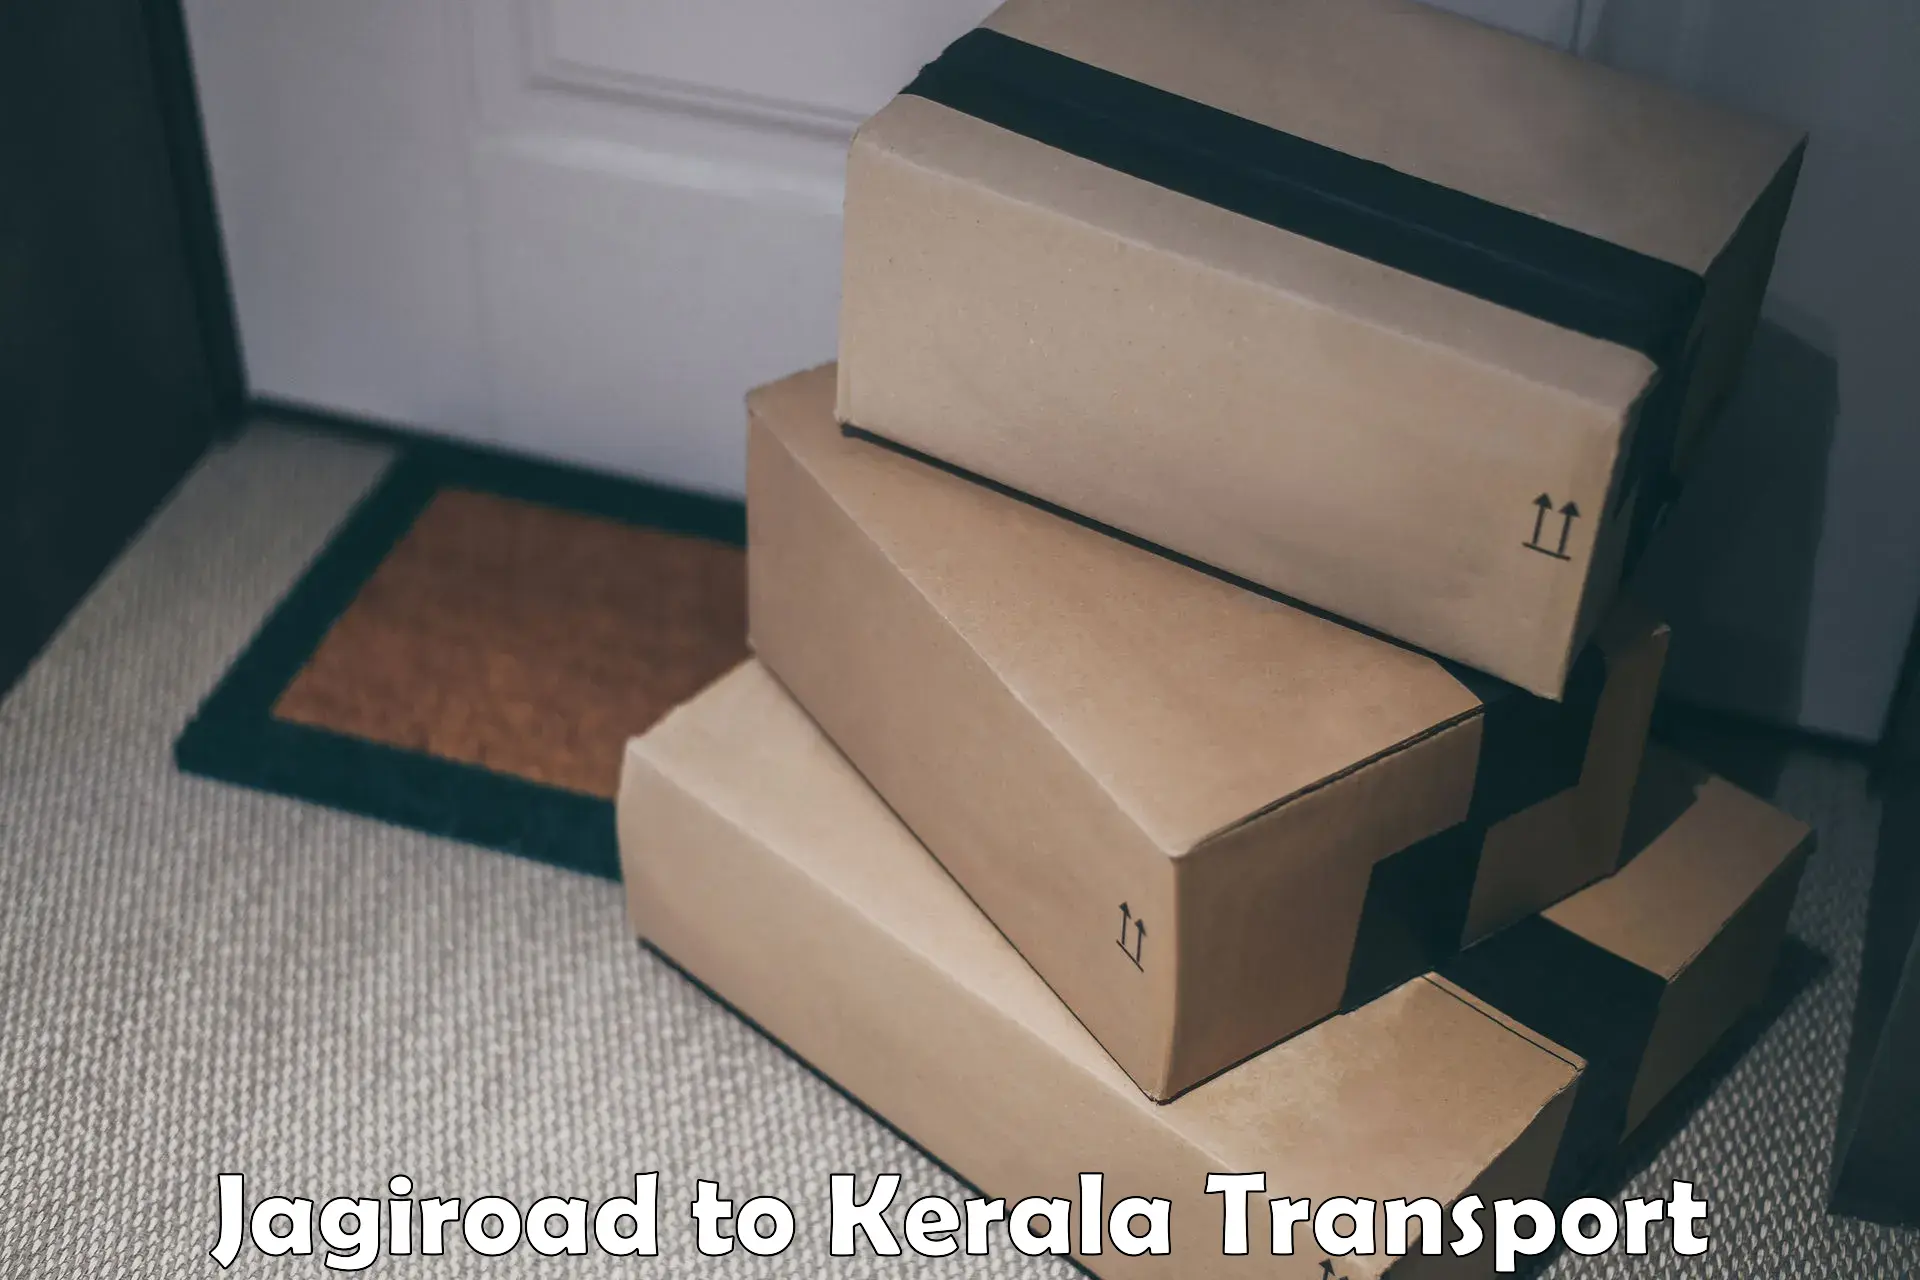 Online transport service Jagiroad to Chalakudy